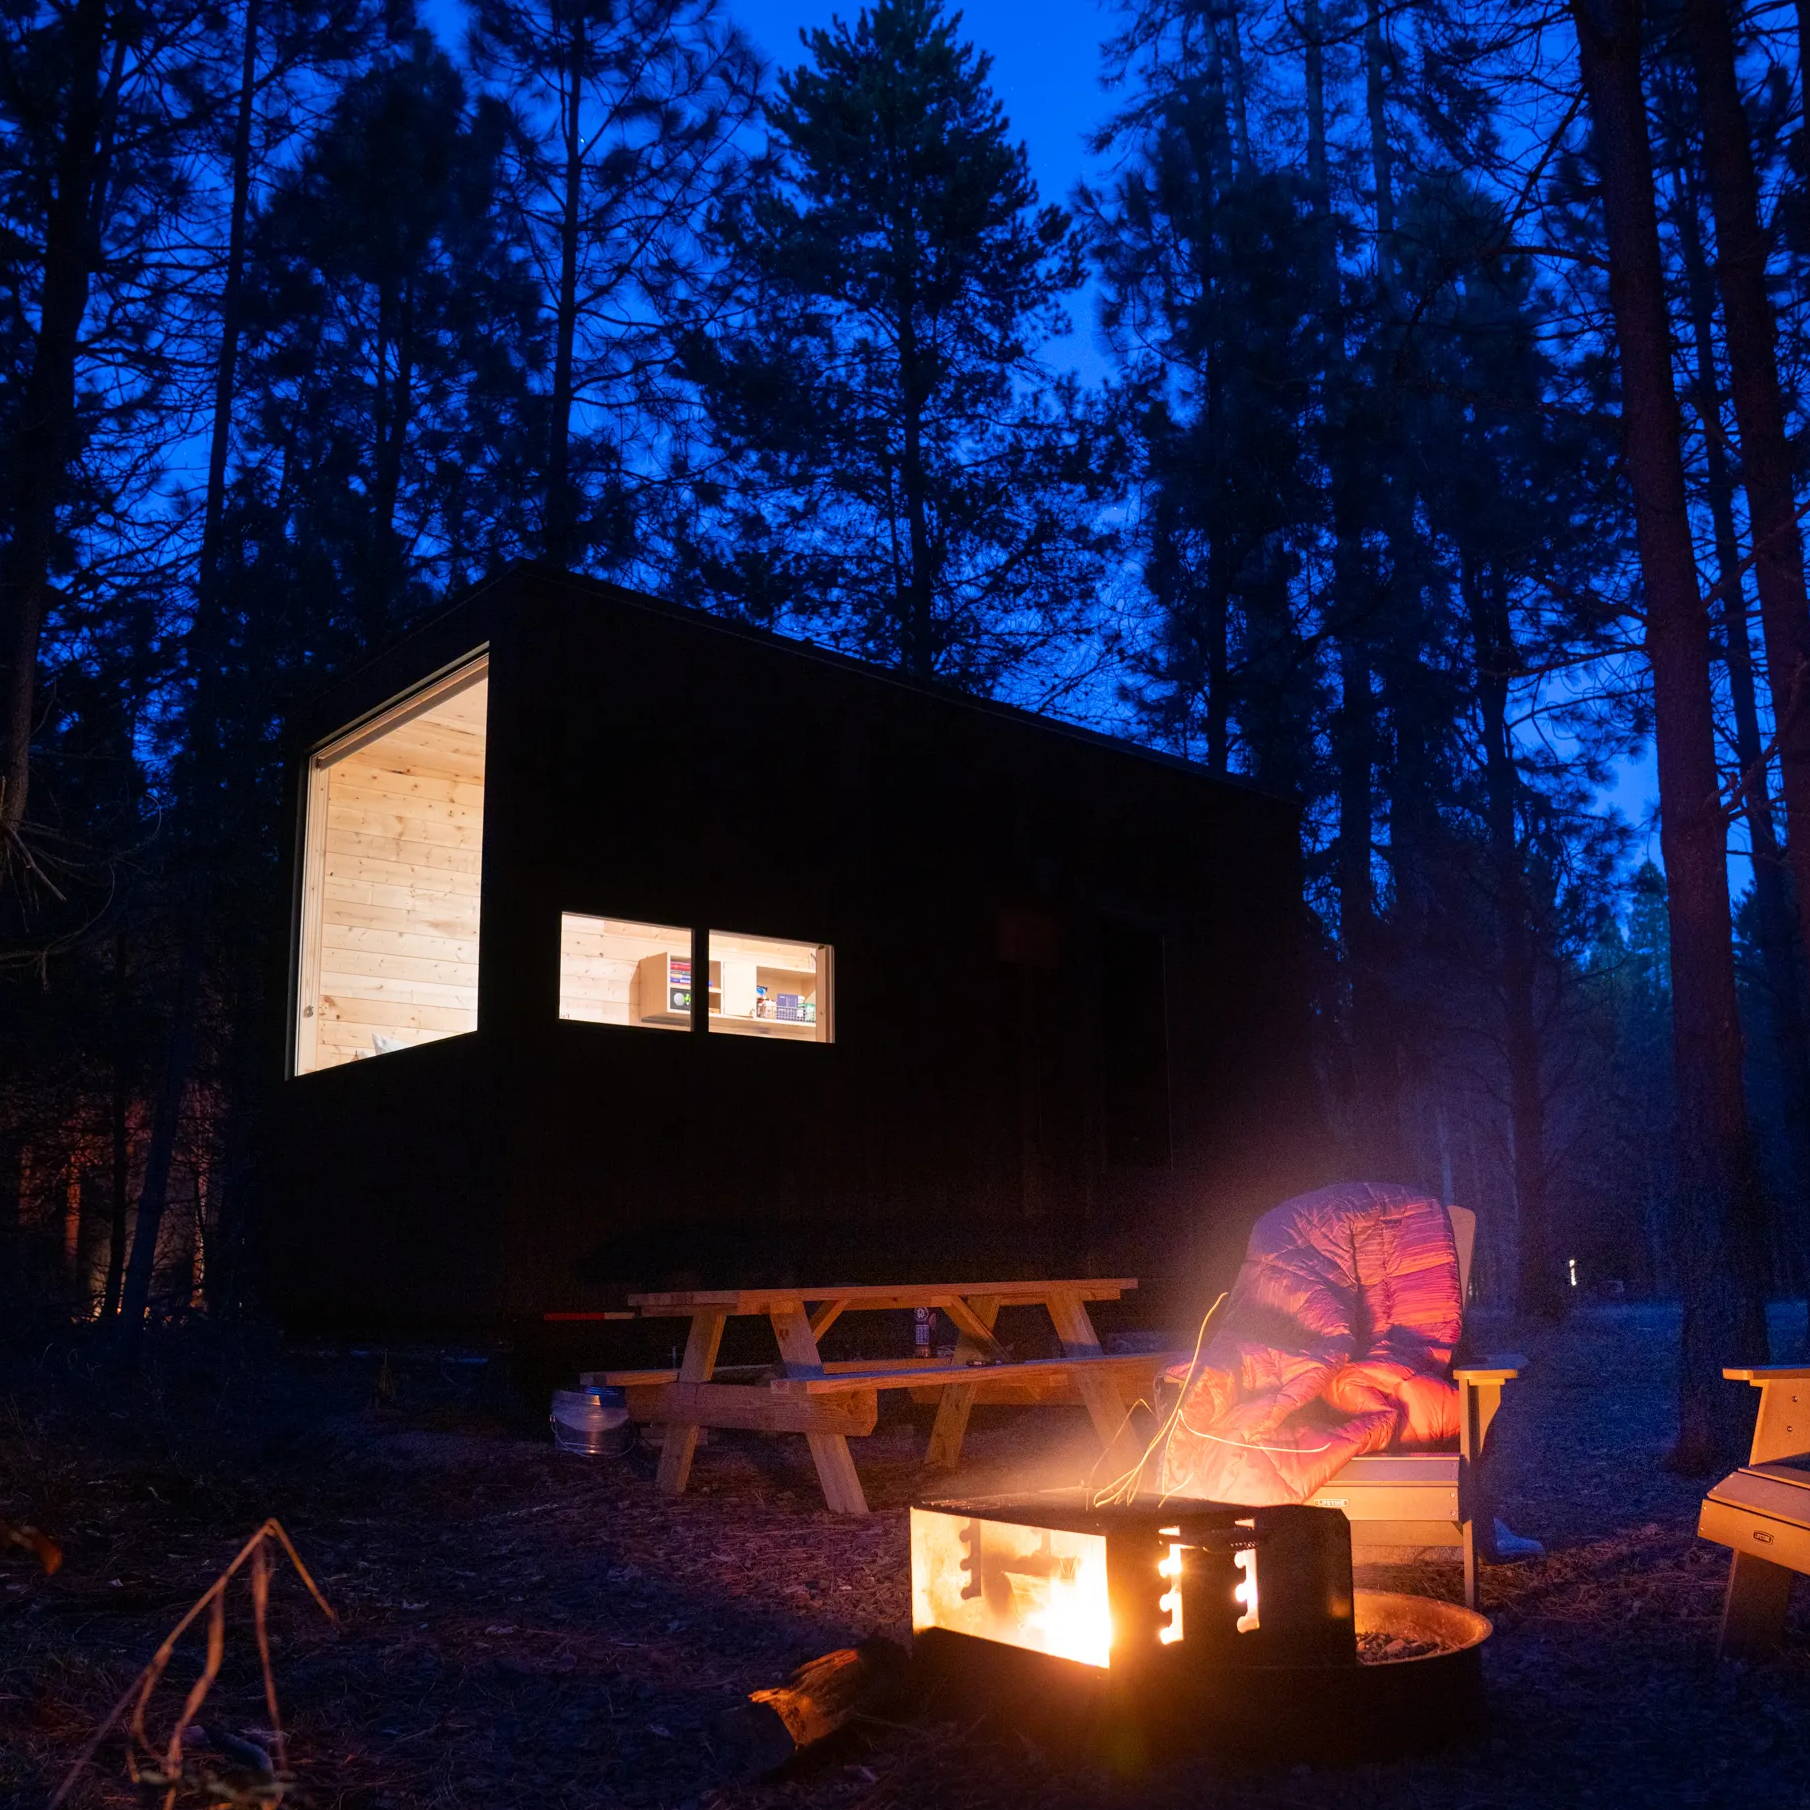 Getaway cabin at night with a campfire and Rumpl blanket